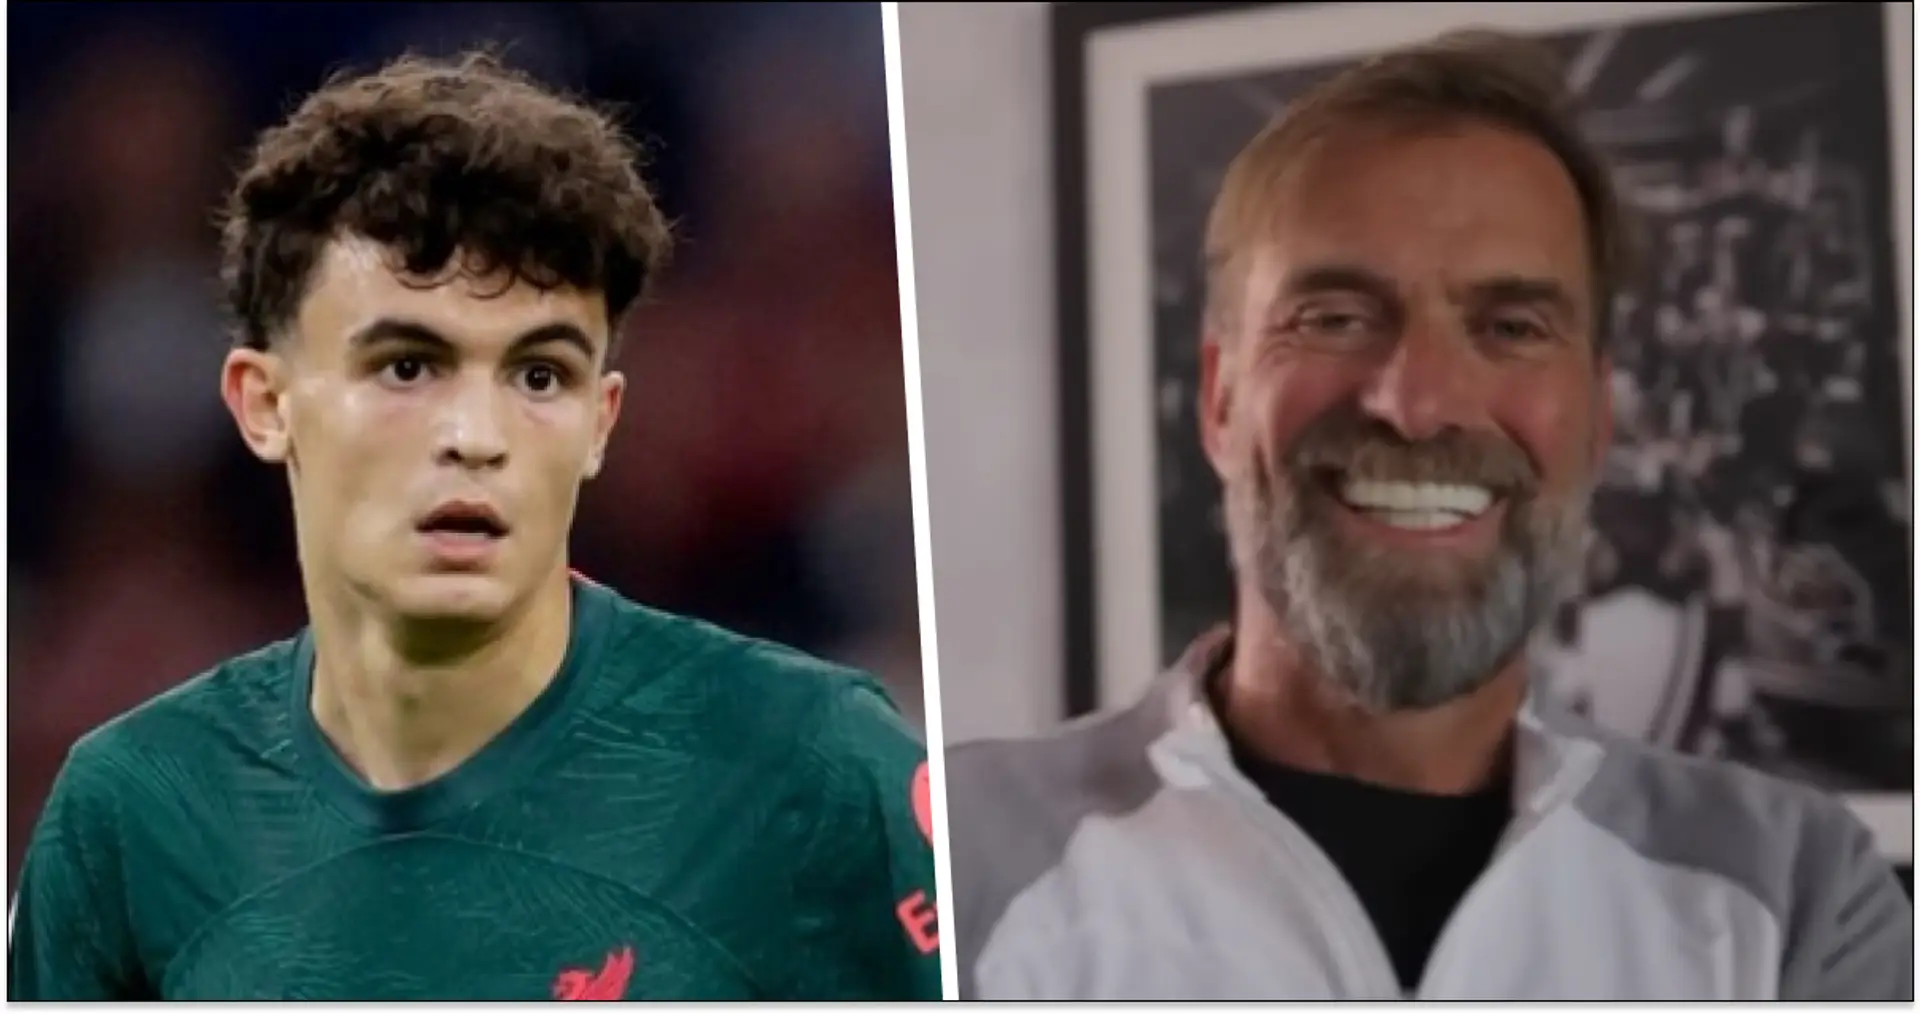 'Cheeky as hell': Klopp hails Bajcetic after youngster's debut goal